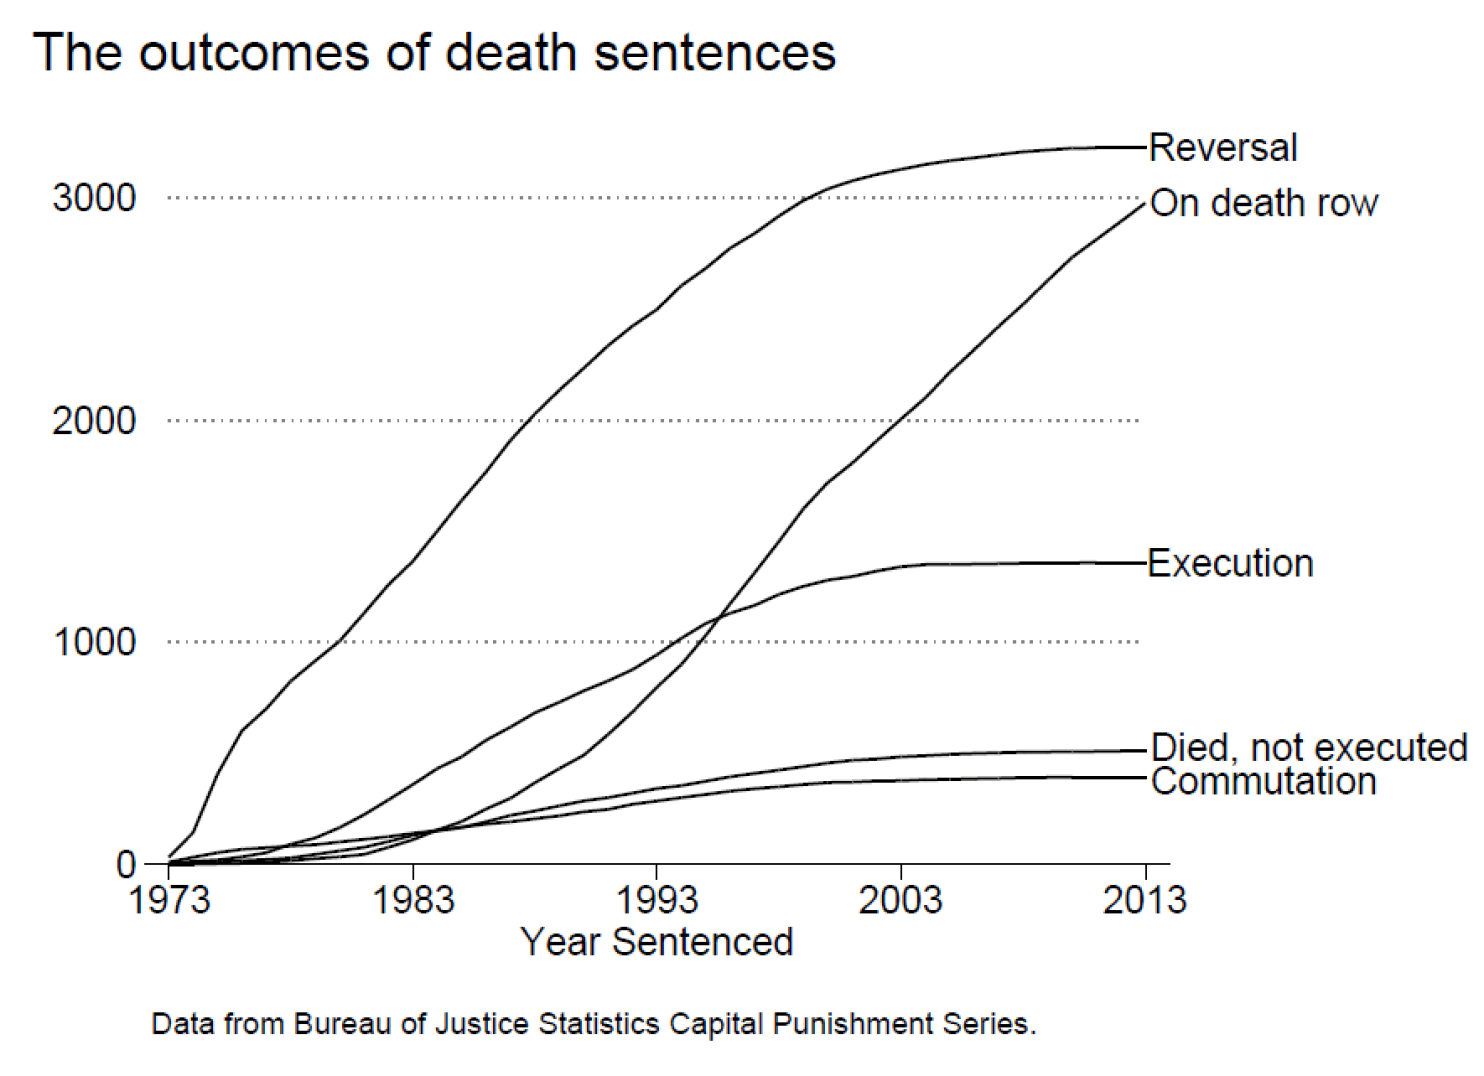 STUDIES: Most Likely Outcome of Death Sentence Is That It Will Be Reversed